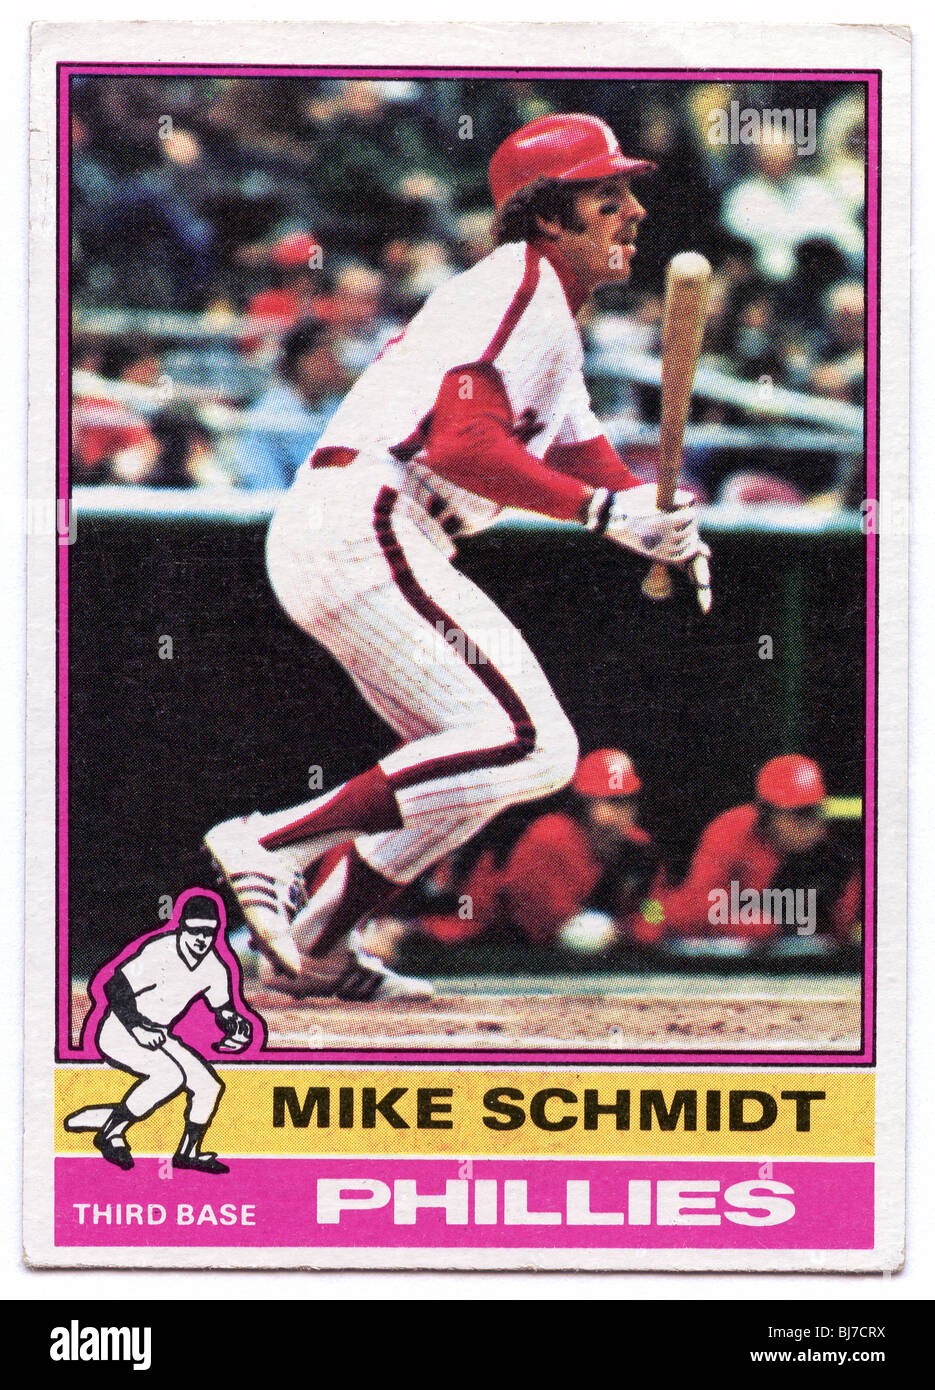 Collectible baseball card - Mike Schmidt of Phillies Stock Photo - Alamy